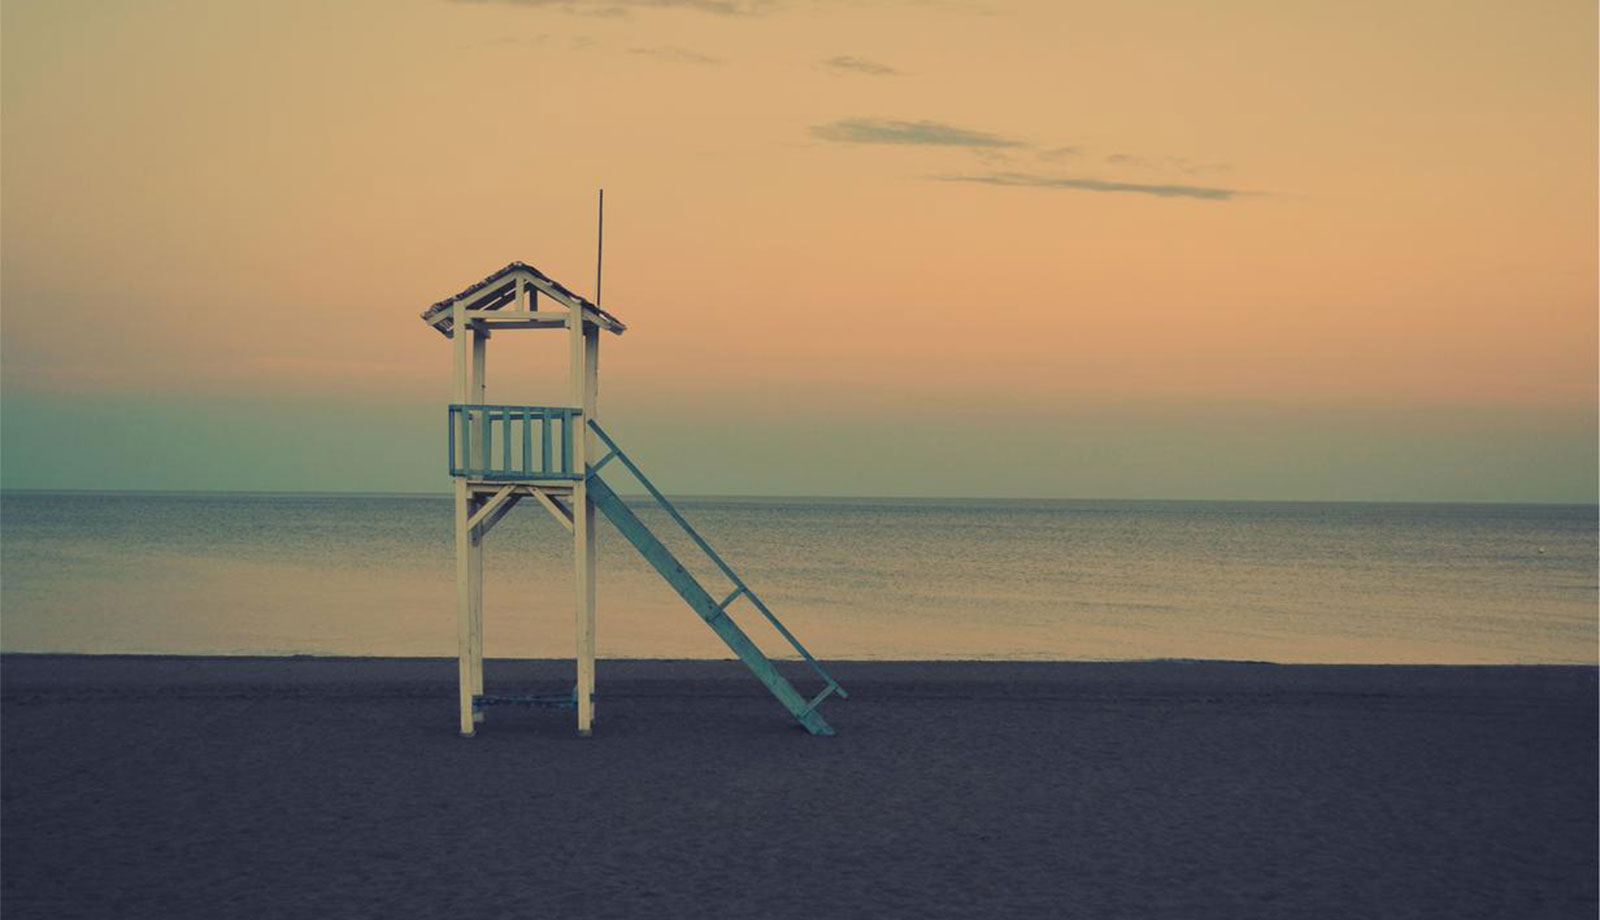 A lifeguard tower on the beach at sunset.